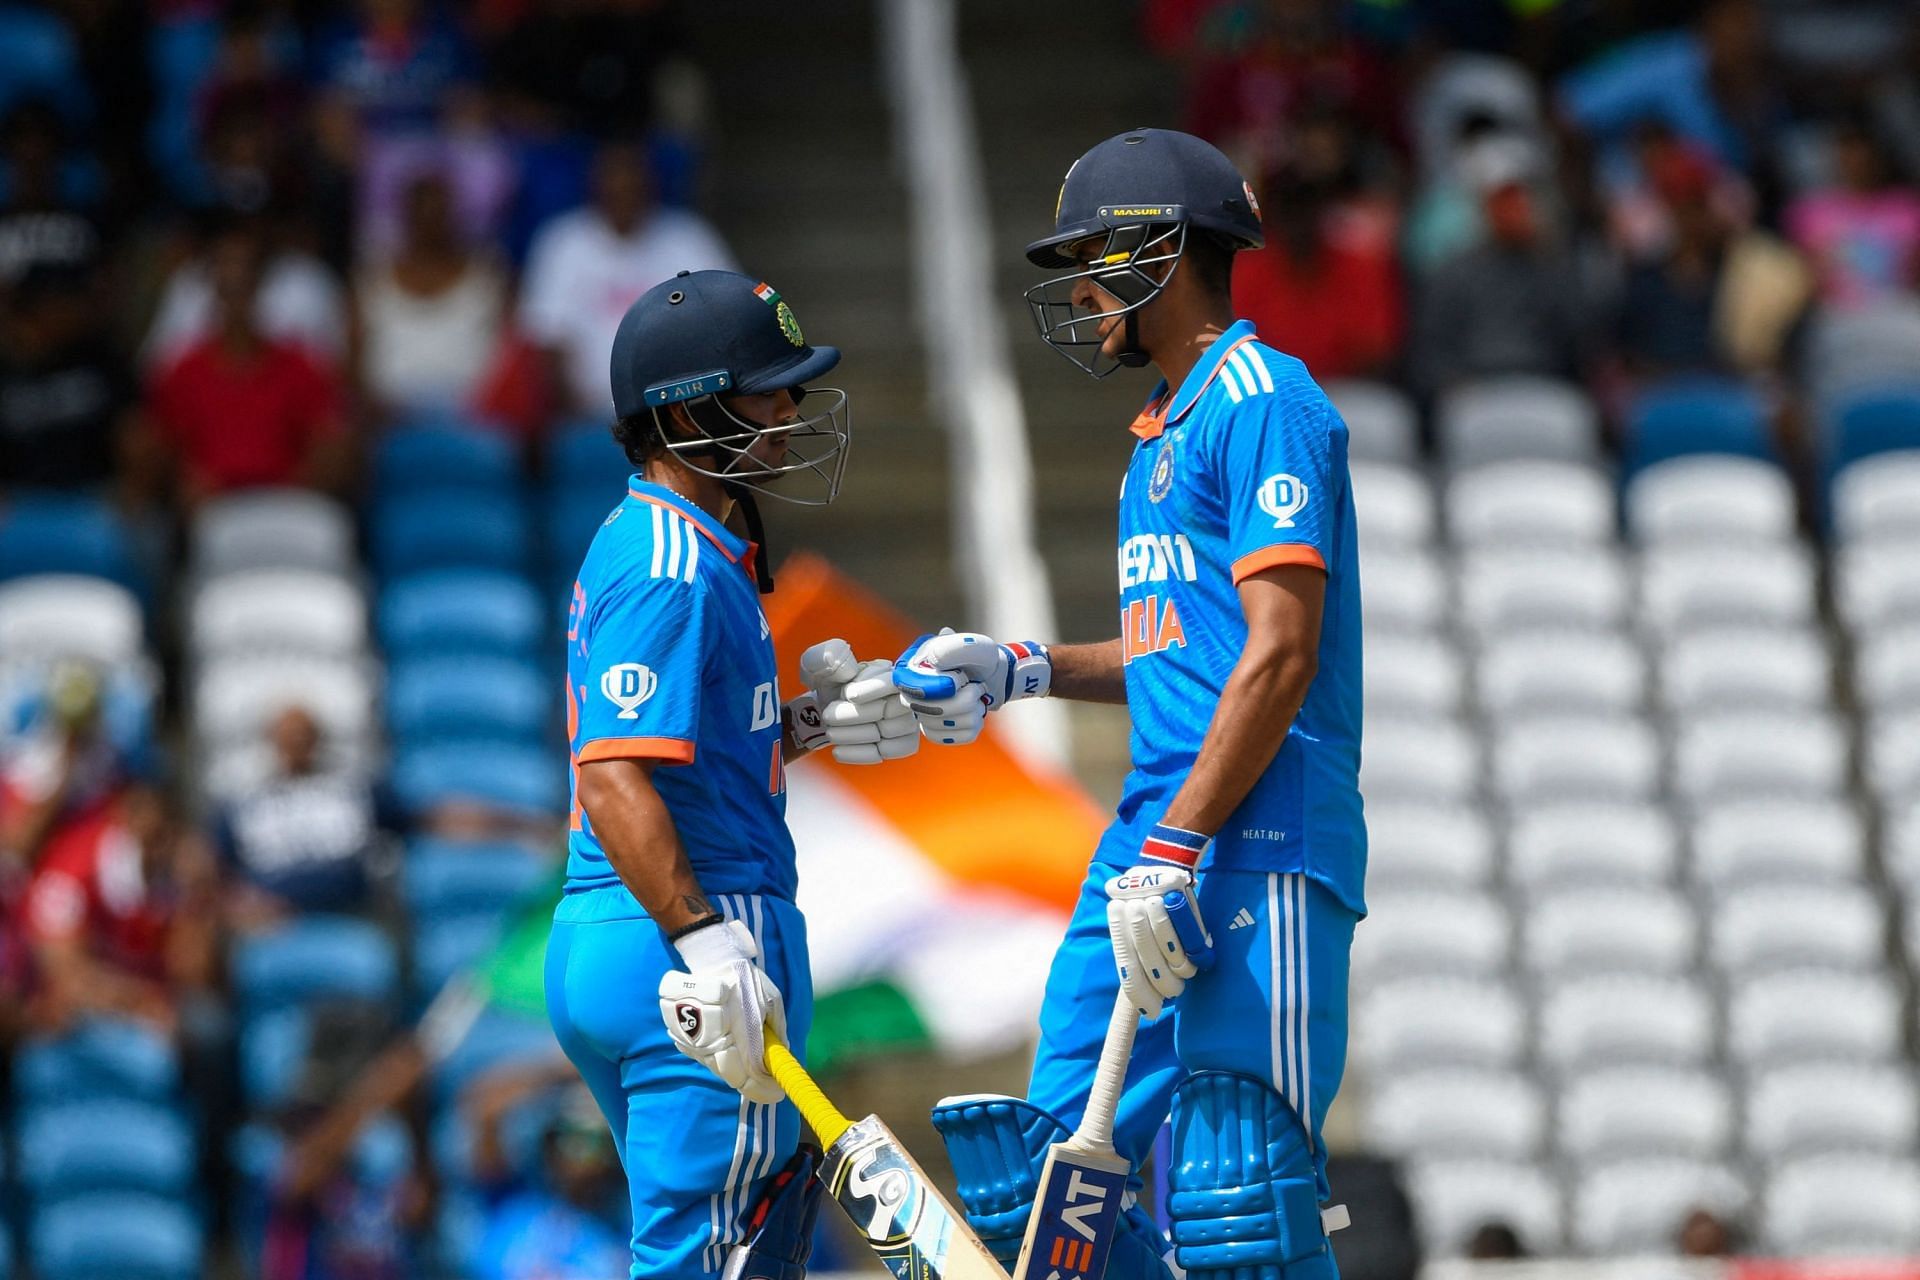 Ishan Kishan and Shubman Gill opened for India in all three ODIs against the West Indies. [P/C: BCCI]